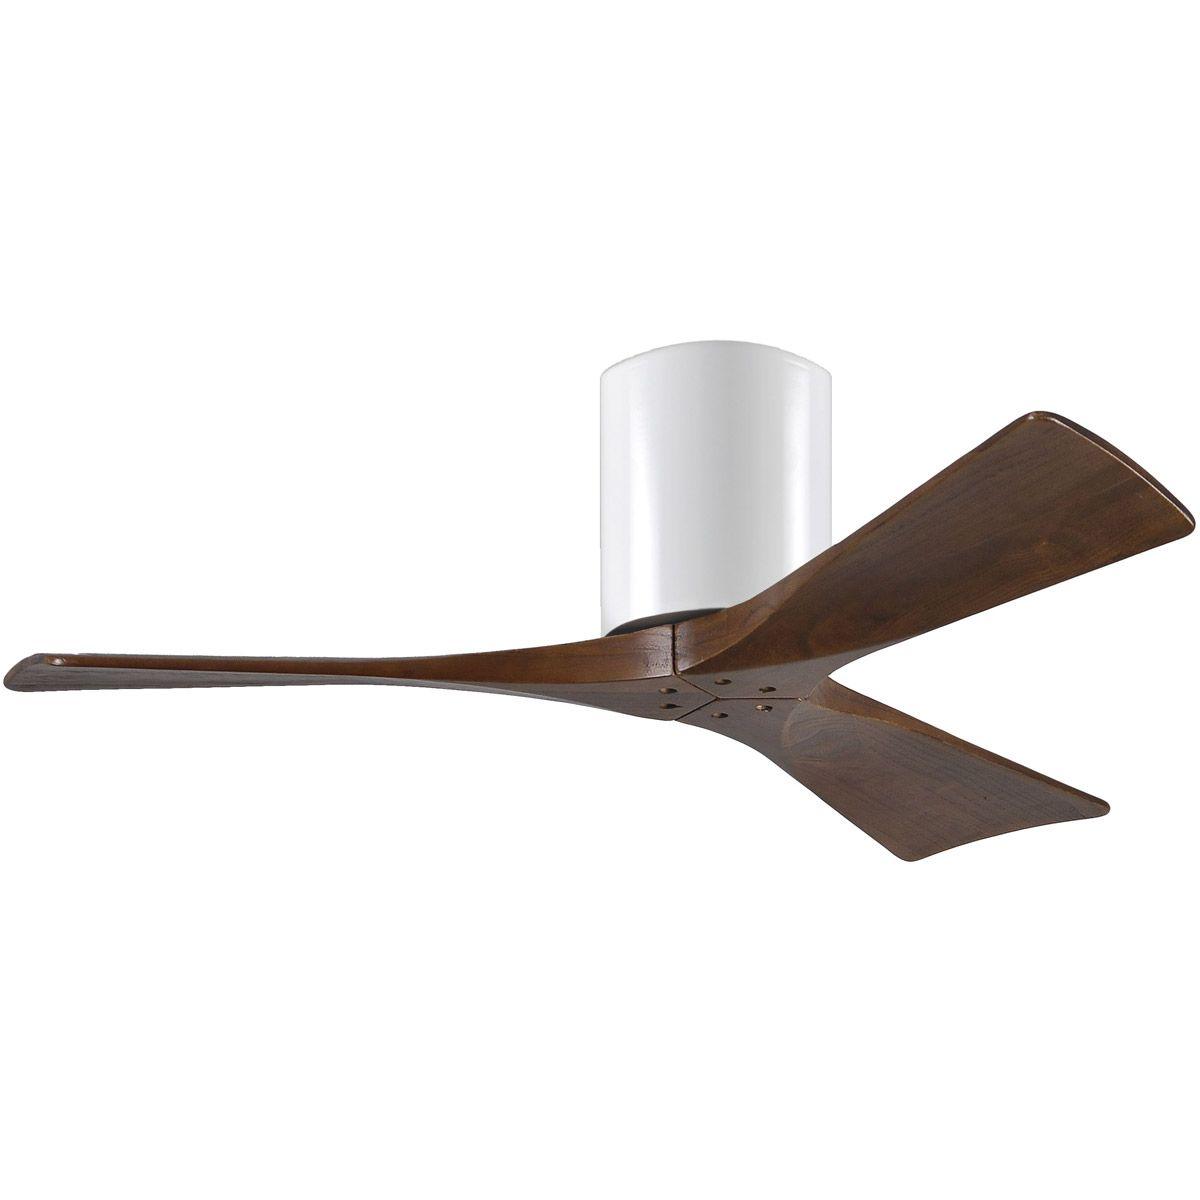 Irene 42 Inch Low Profile Indoor/Outdoor Ceiling Fan With Remote